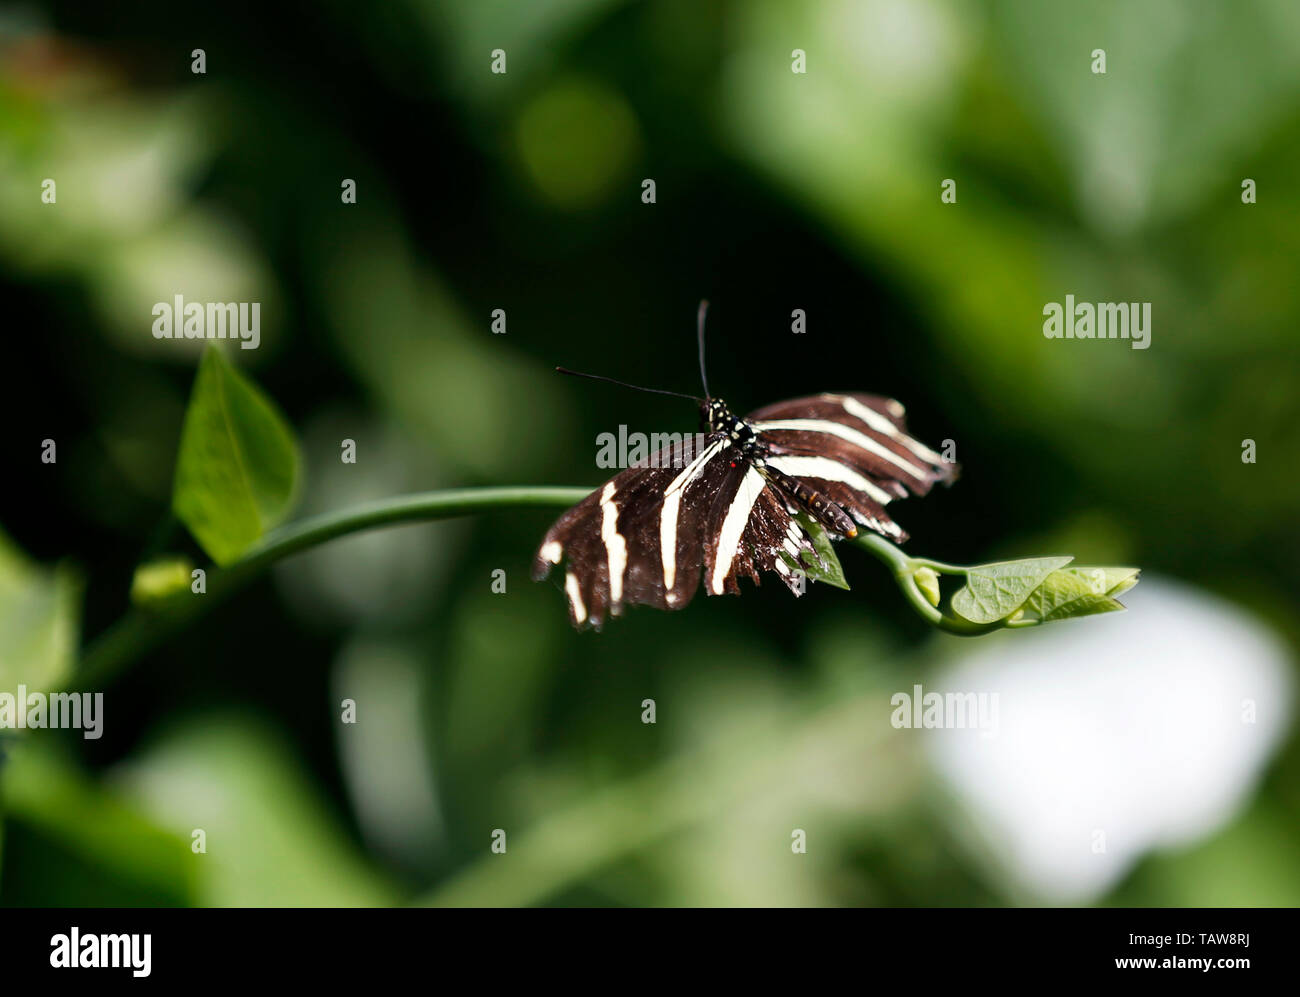 Los Angeles, USA. 27th May, 2019. A butterfly is seen on leaves at the Butterfly Pavilion of the Natural History Museum of Los Angeles County in Los Angeles, the United States, May 27, 2019. The butterfly exhibition at the Natural History Museum of Los Angeles County showcases hundreds of butterflies and the plants that surround them. Credit: Li Ying/Xinhua/Alamy Live News Stock Photo